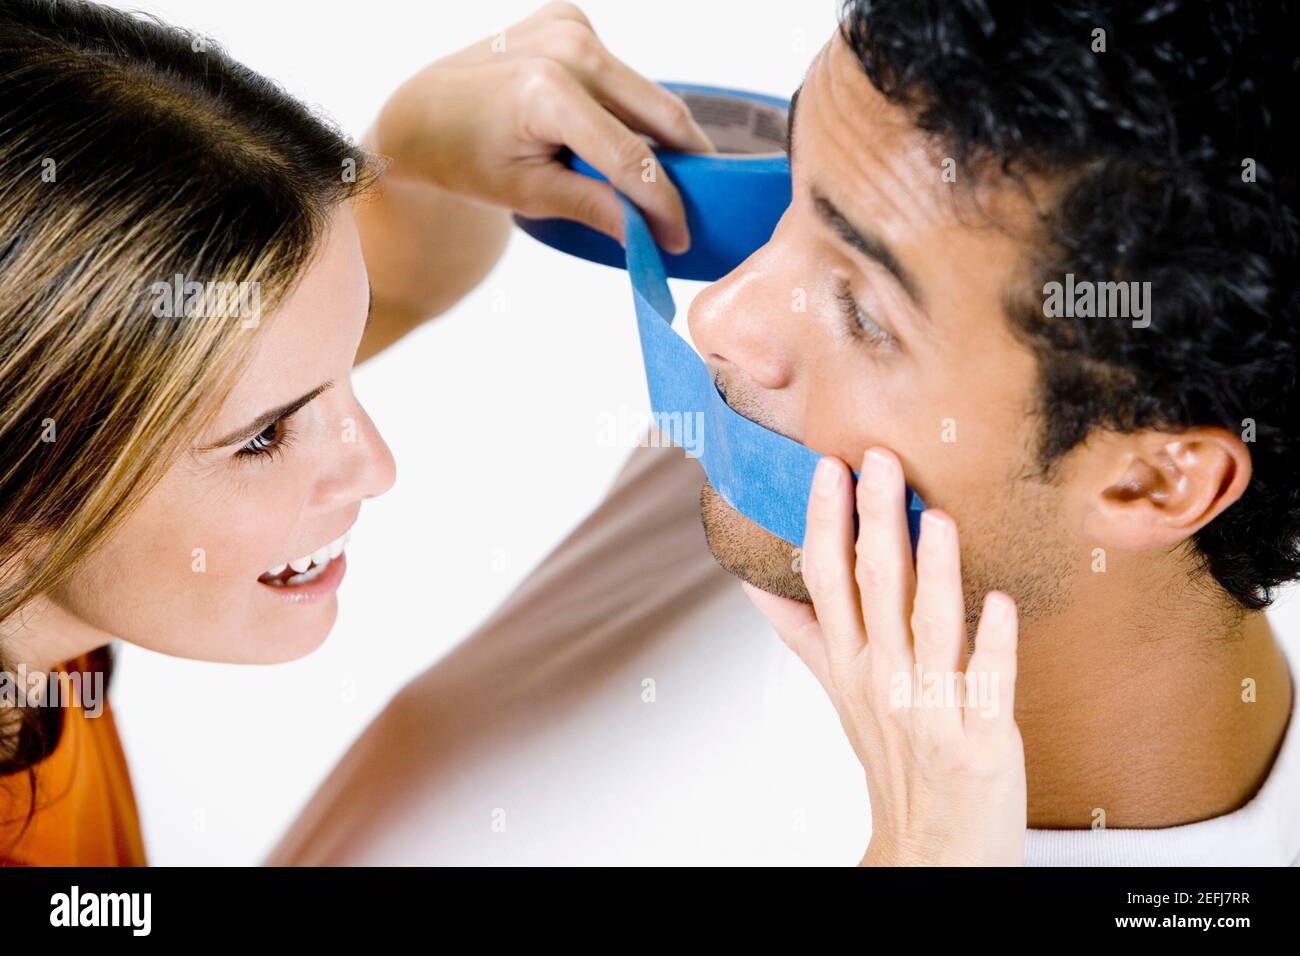 Close-up of a mid adult woman sticking an adhesive tape on a young manÅ½s mouth Stock Photo